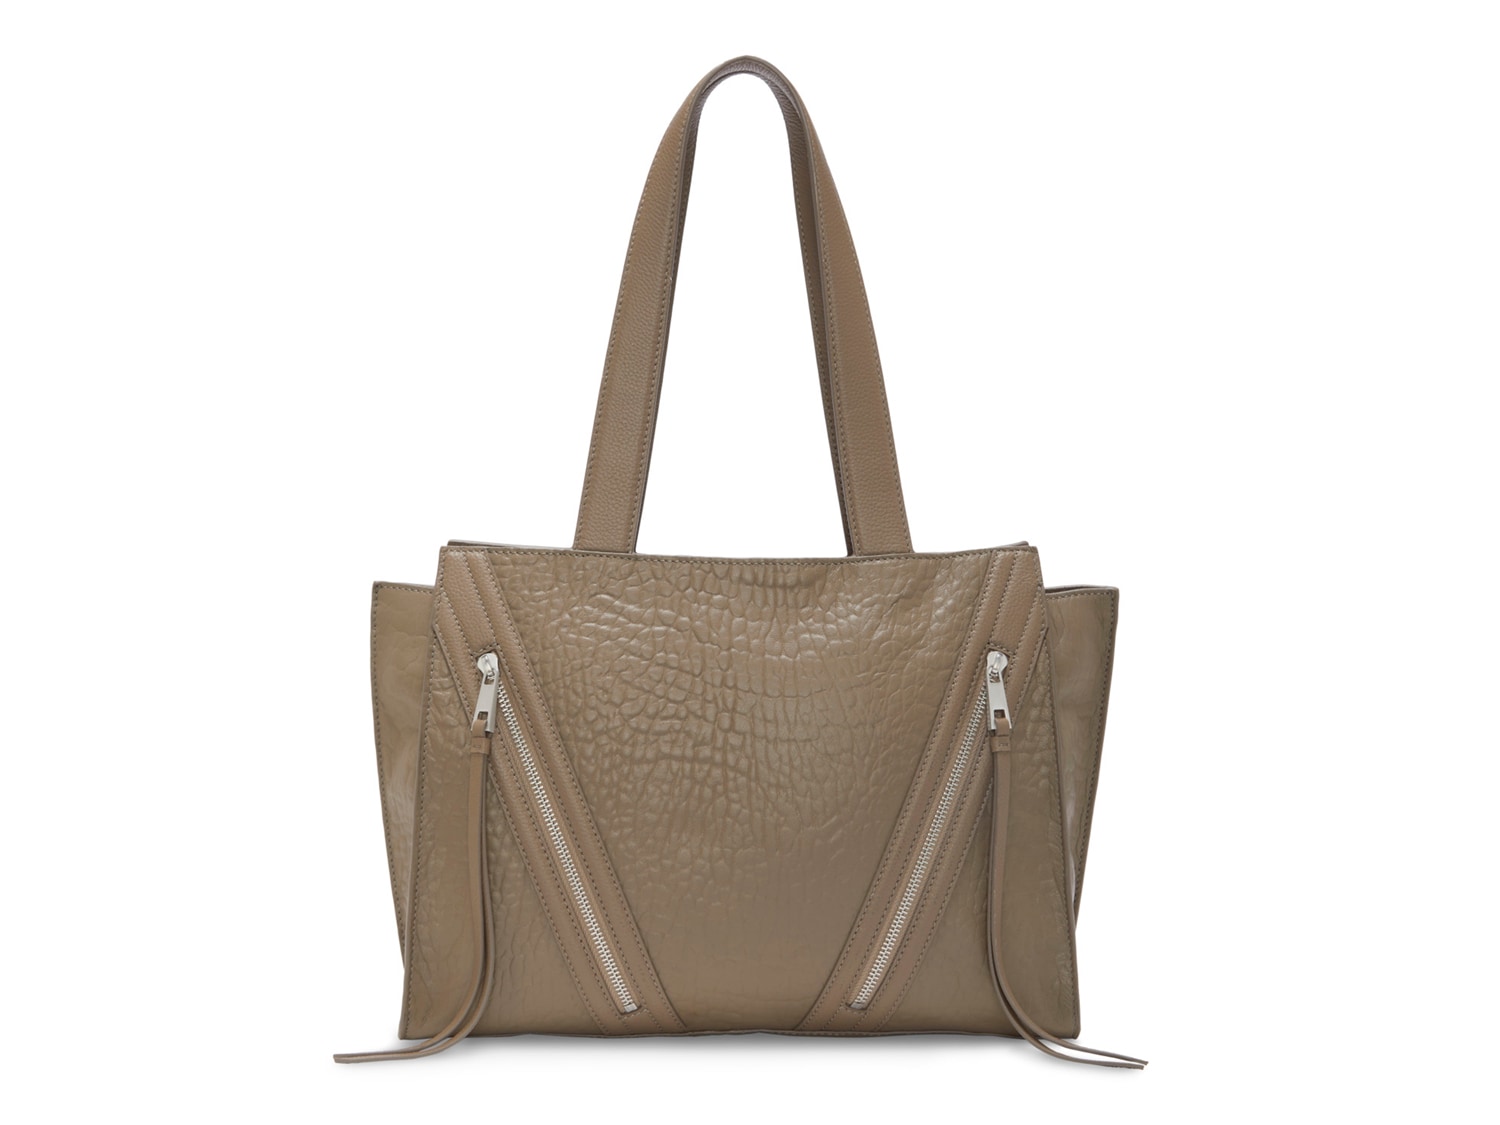 Vince Camuto Wayhn Leather Tote - Free Shipping | DSW